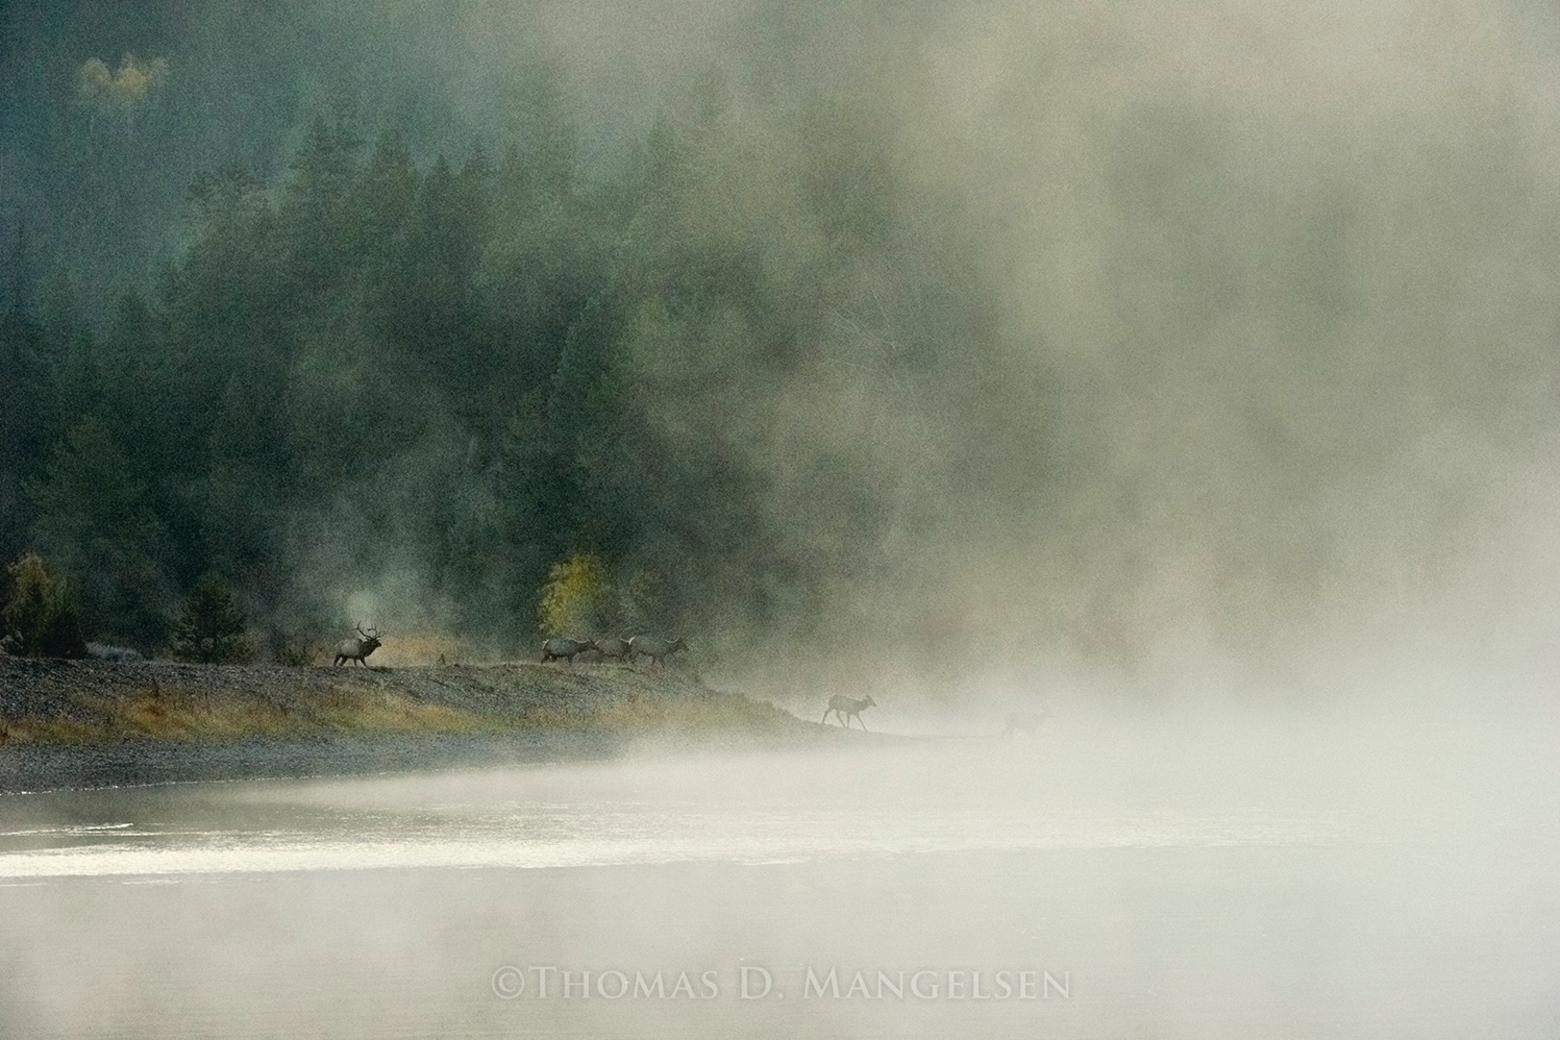 In "Snake River Crossing," a herd of elk uses a veil of fog as cover to discreetly cross the Snake River in Grand Teton National Park.  Photograph courtesy Thomas D. Mangelsen